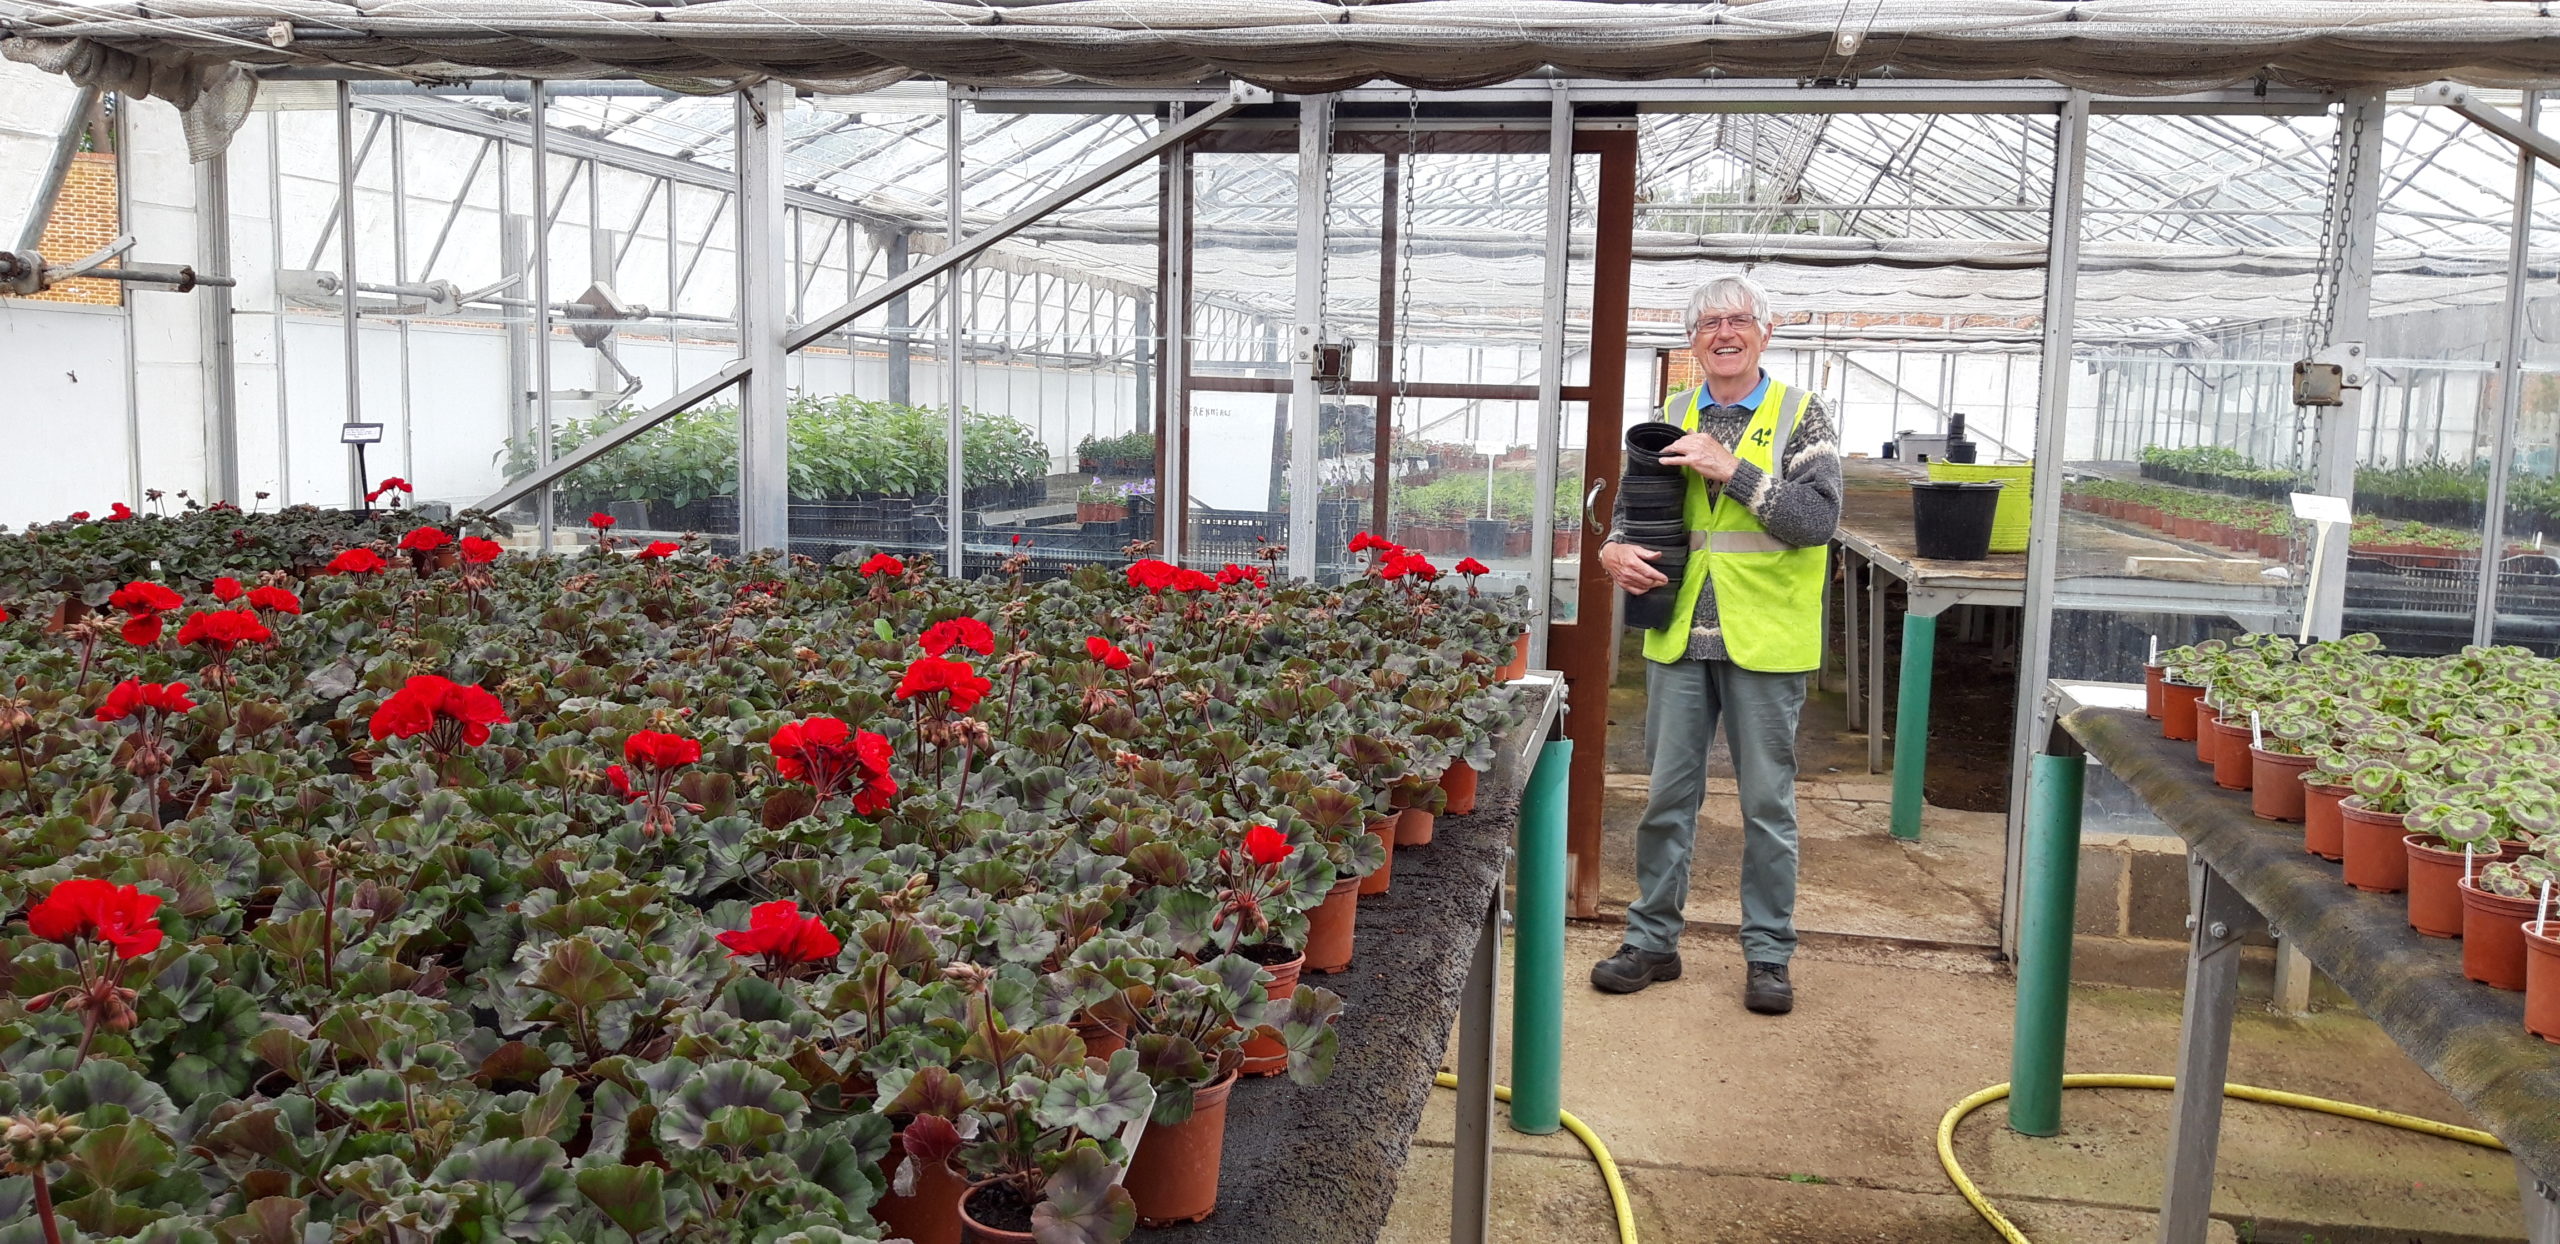 An ActivLives volunteer stands in the green house at Chantry Walled Garden